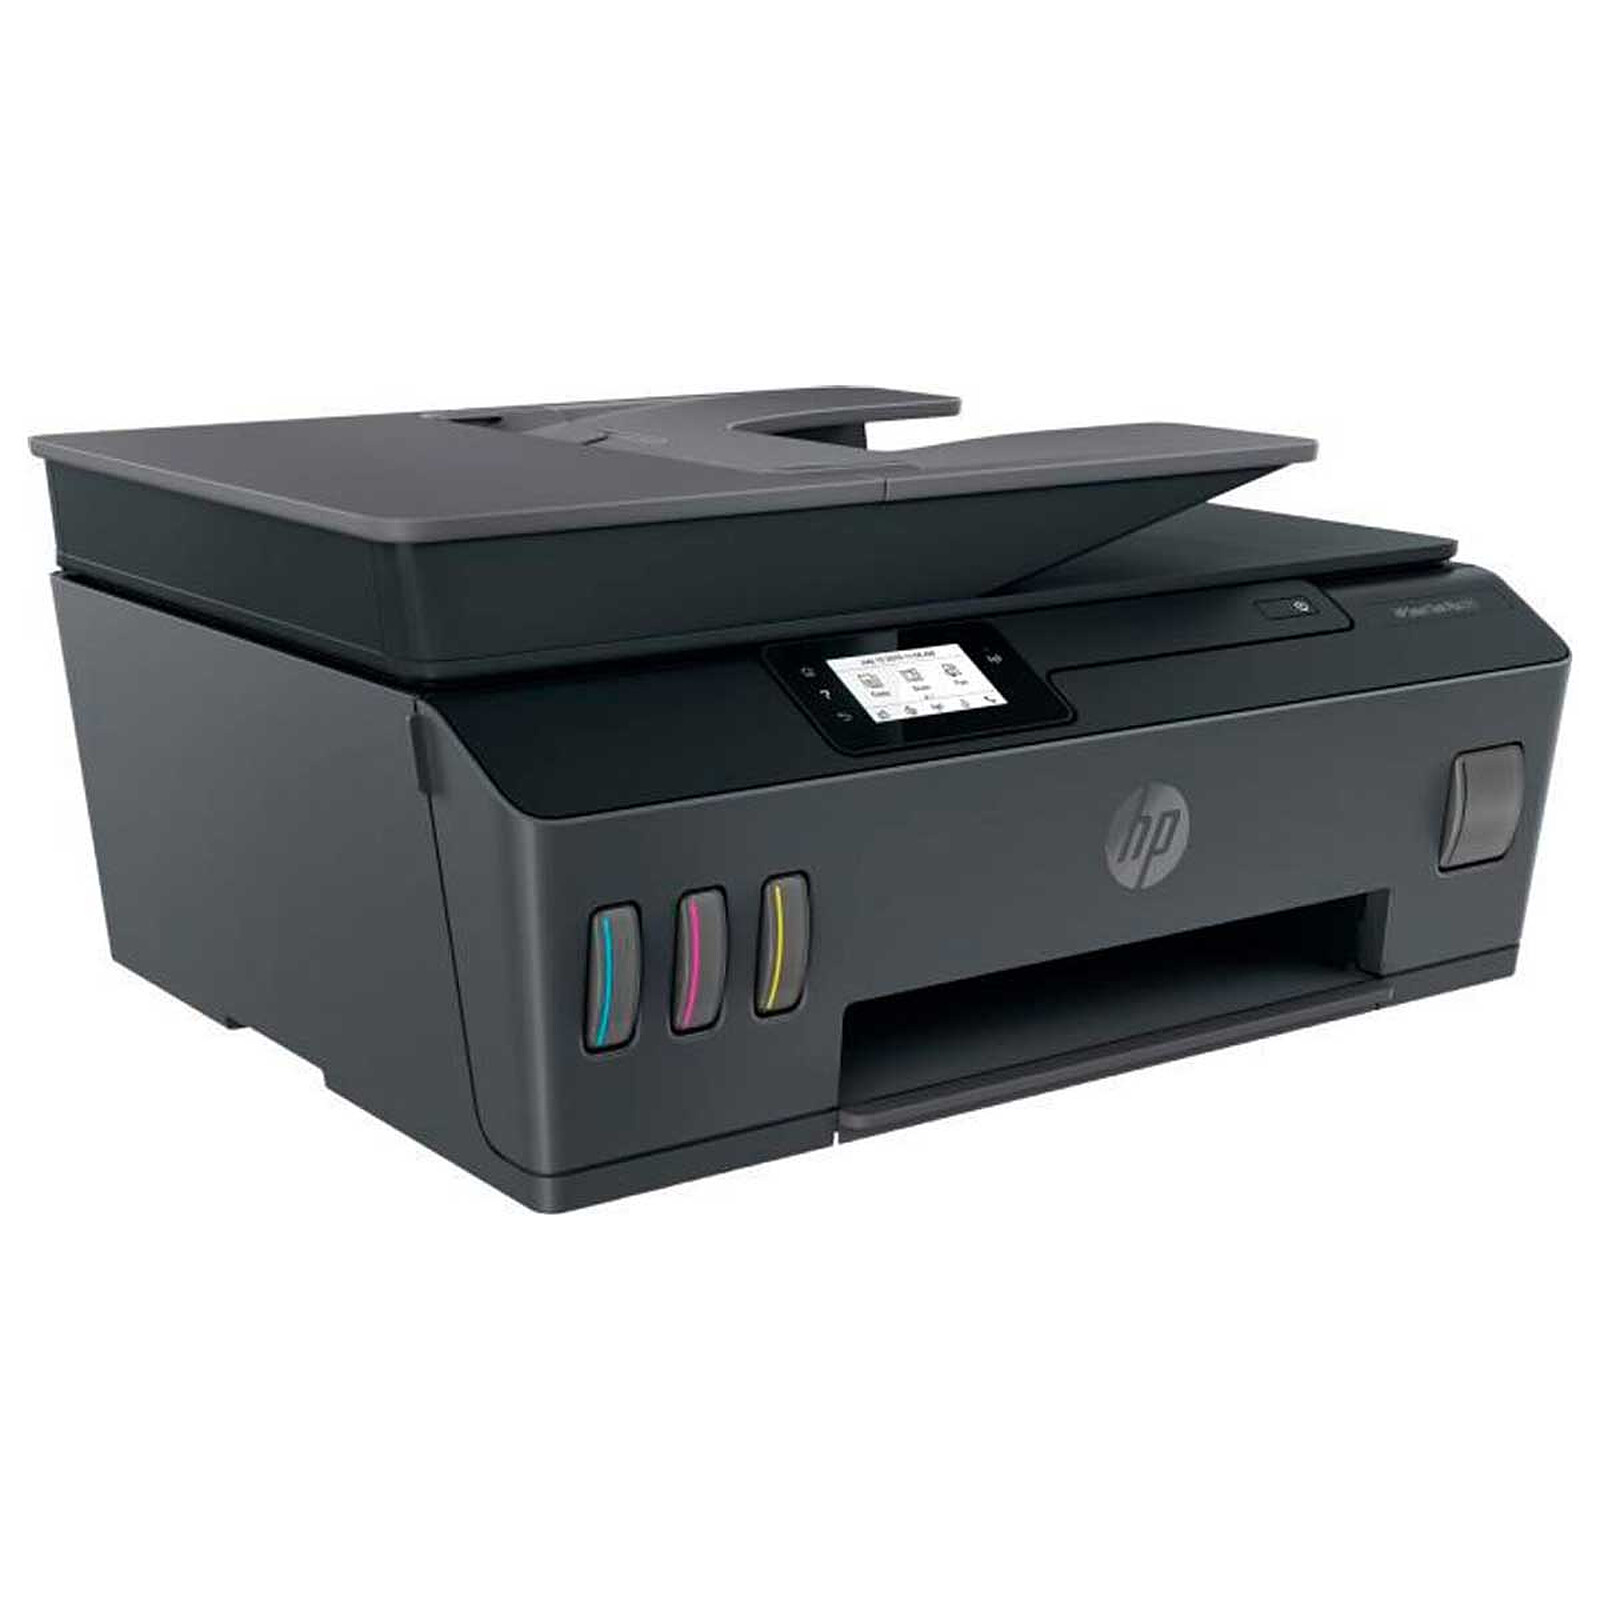 Product  HP Smart Tank 7305 All-in-One - multifunction printer